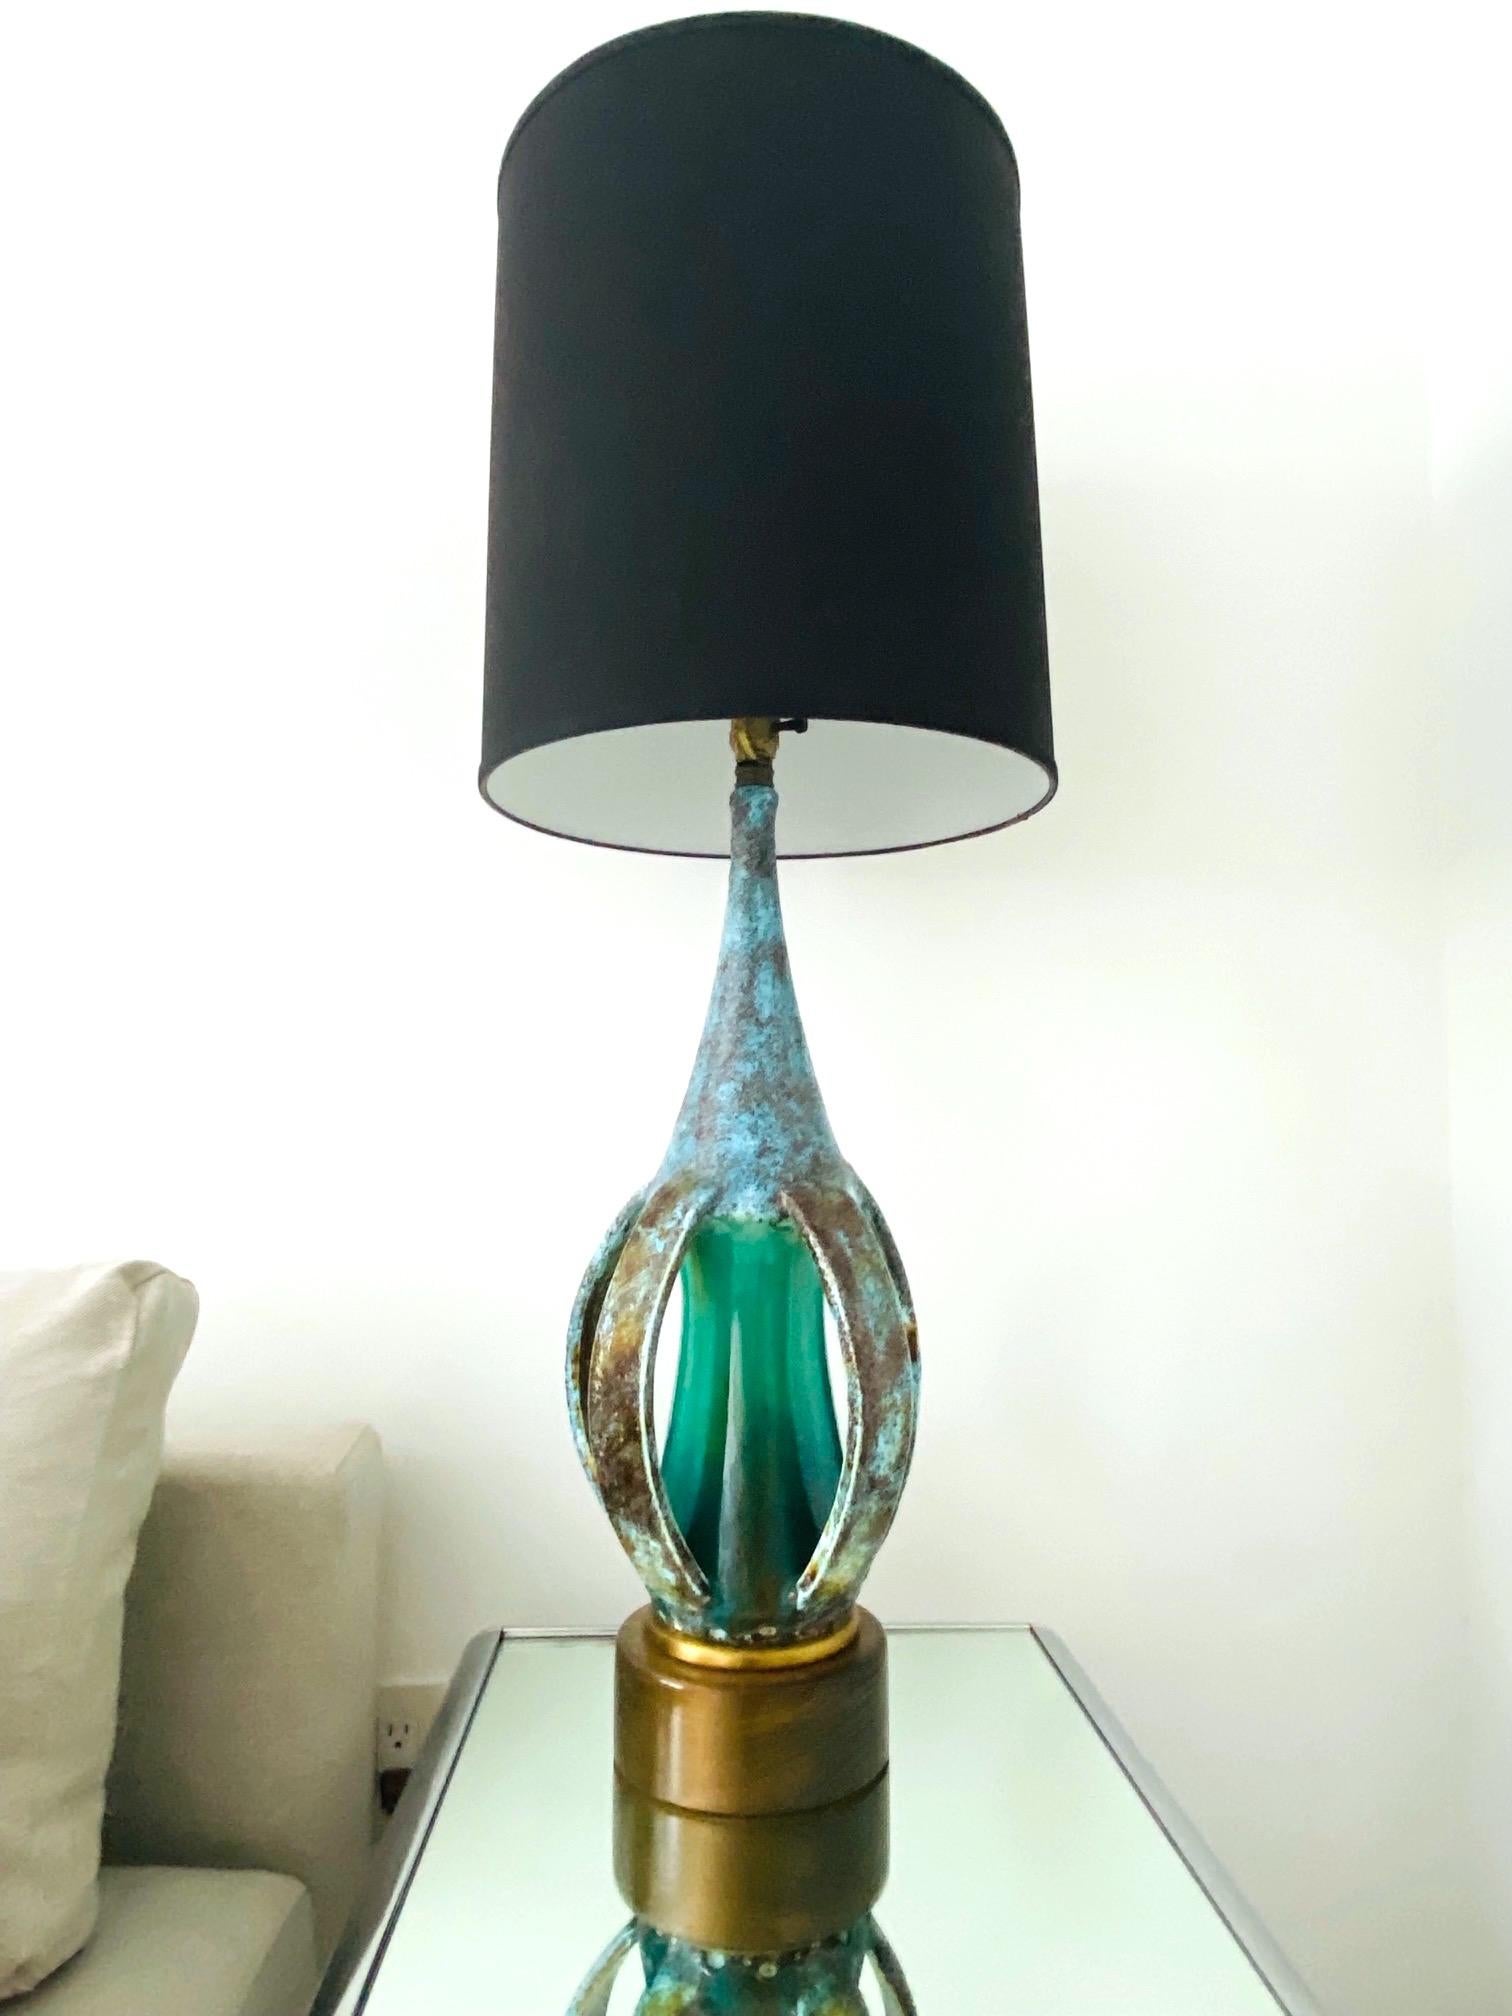 Danish Mid-Century Modern stoneware lamp with glazed finish in turquoise blue. Unique Studio Pottery lamp features an elongated vessel with open slats along the lower portion. Beautifully handmade in extraordinary matte glazed finish of robin's-egg